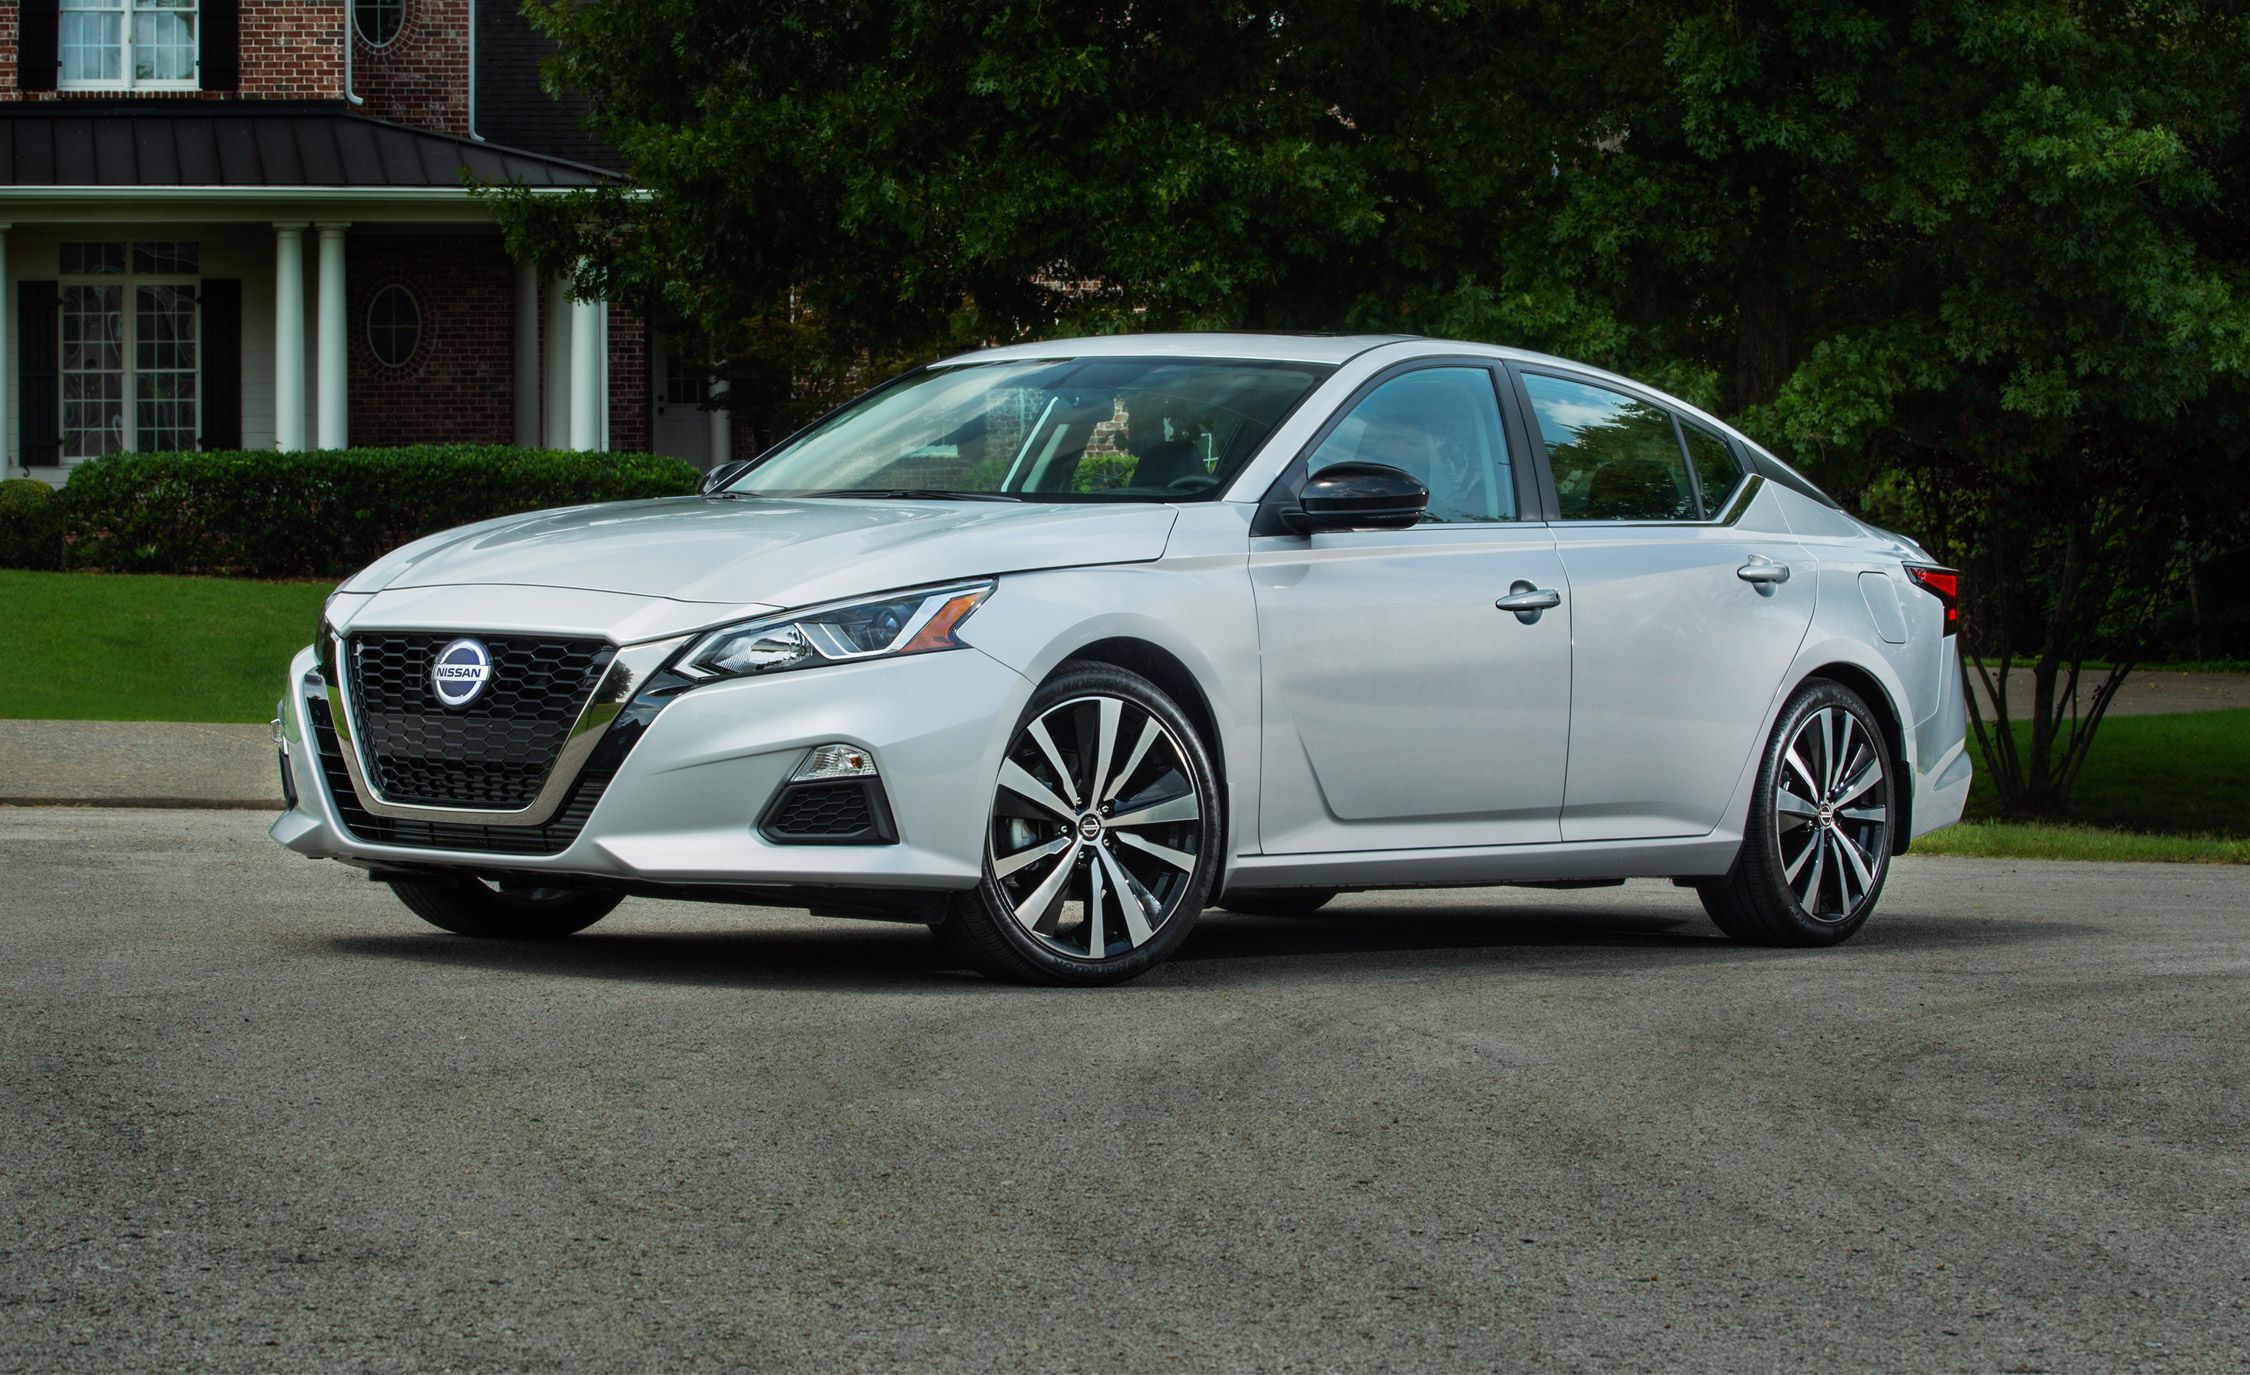 2019 Nissan Altima Boasts Powertrain Upgrades And New Styling